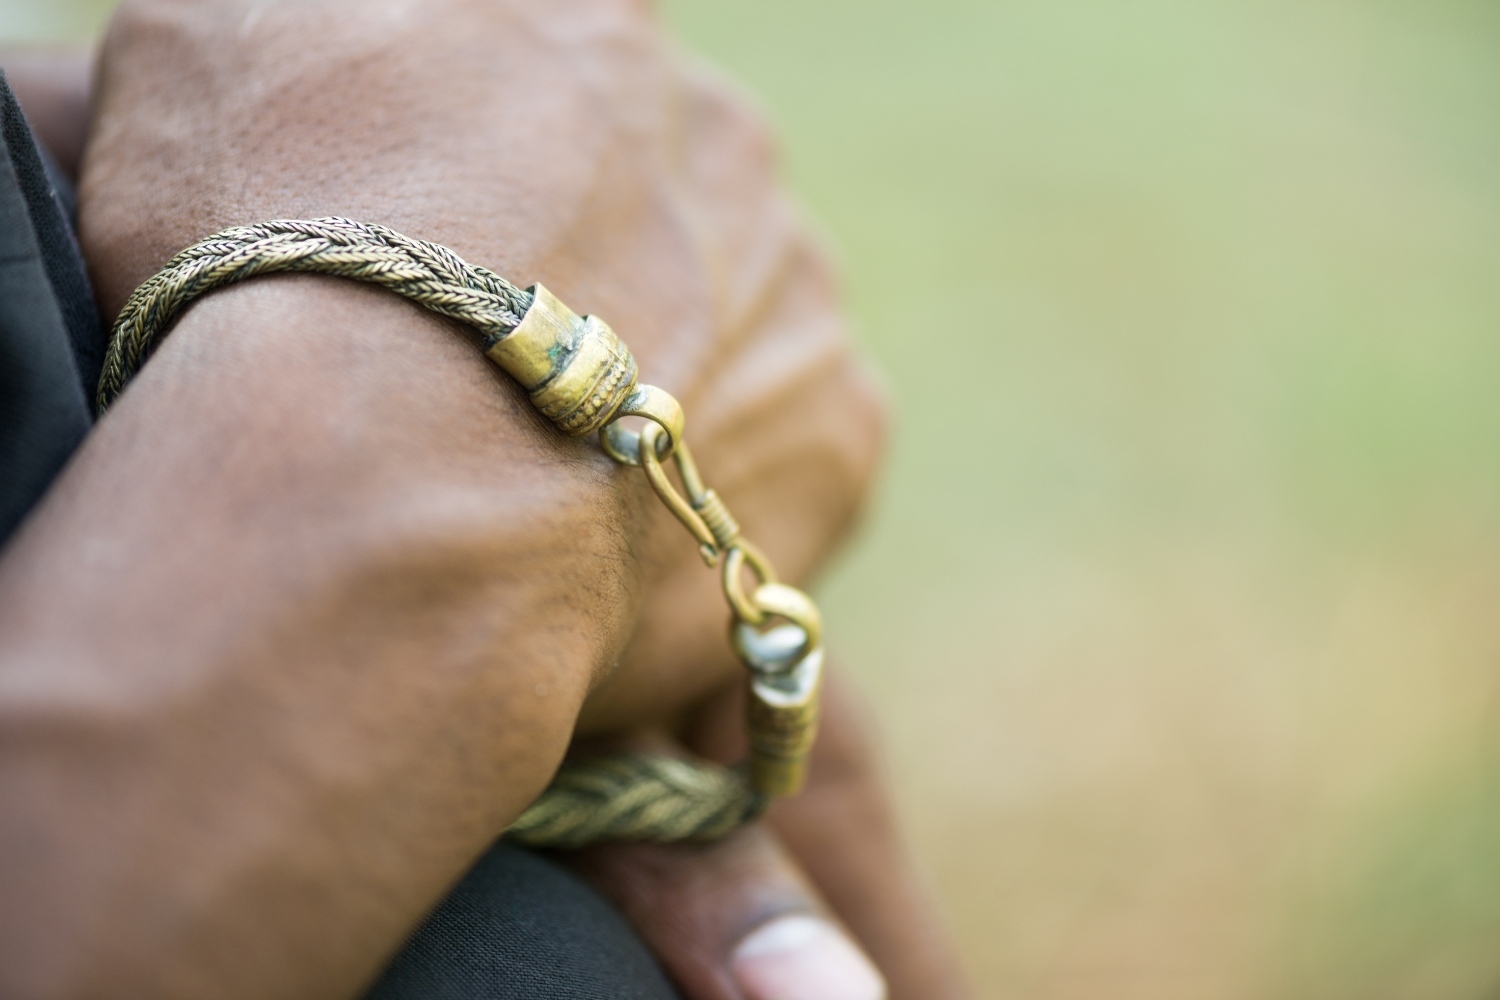 The Surprising Reason Why Copper Bracelets Turn Your Wrist Green